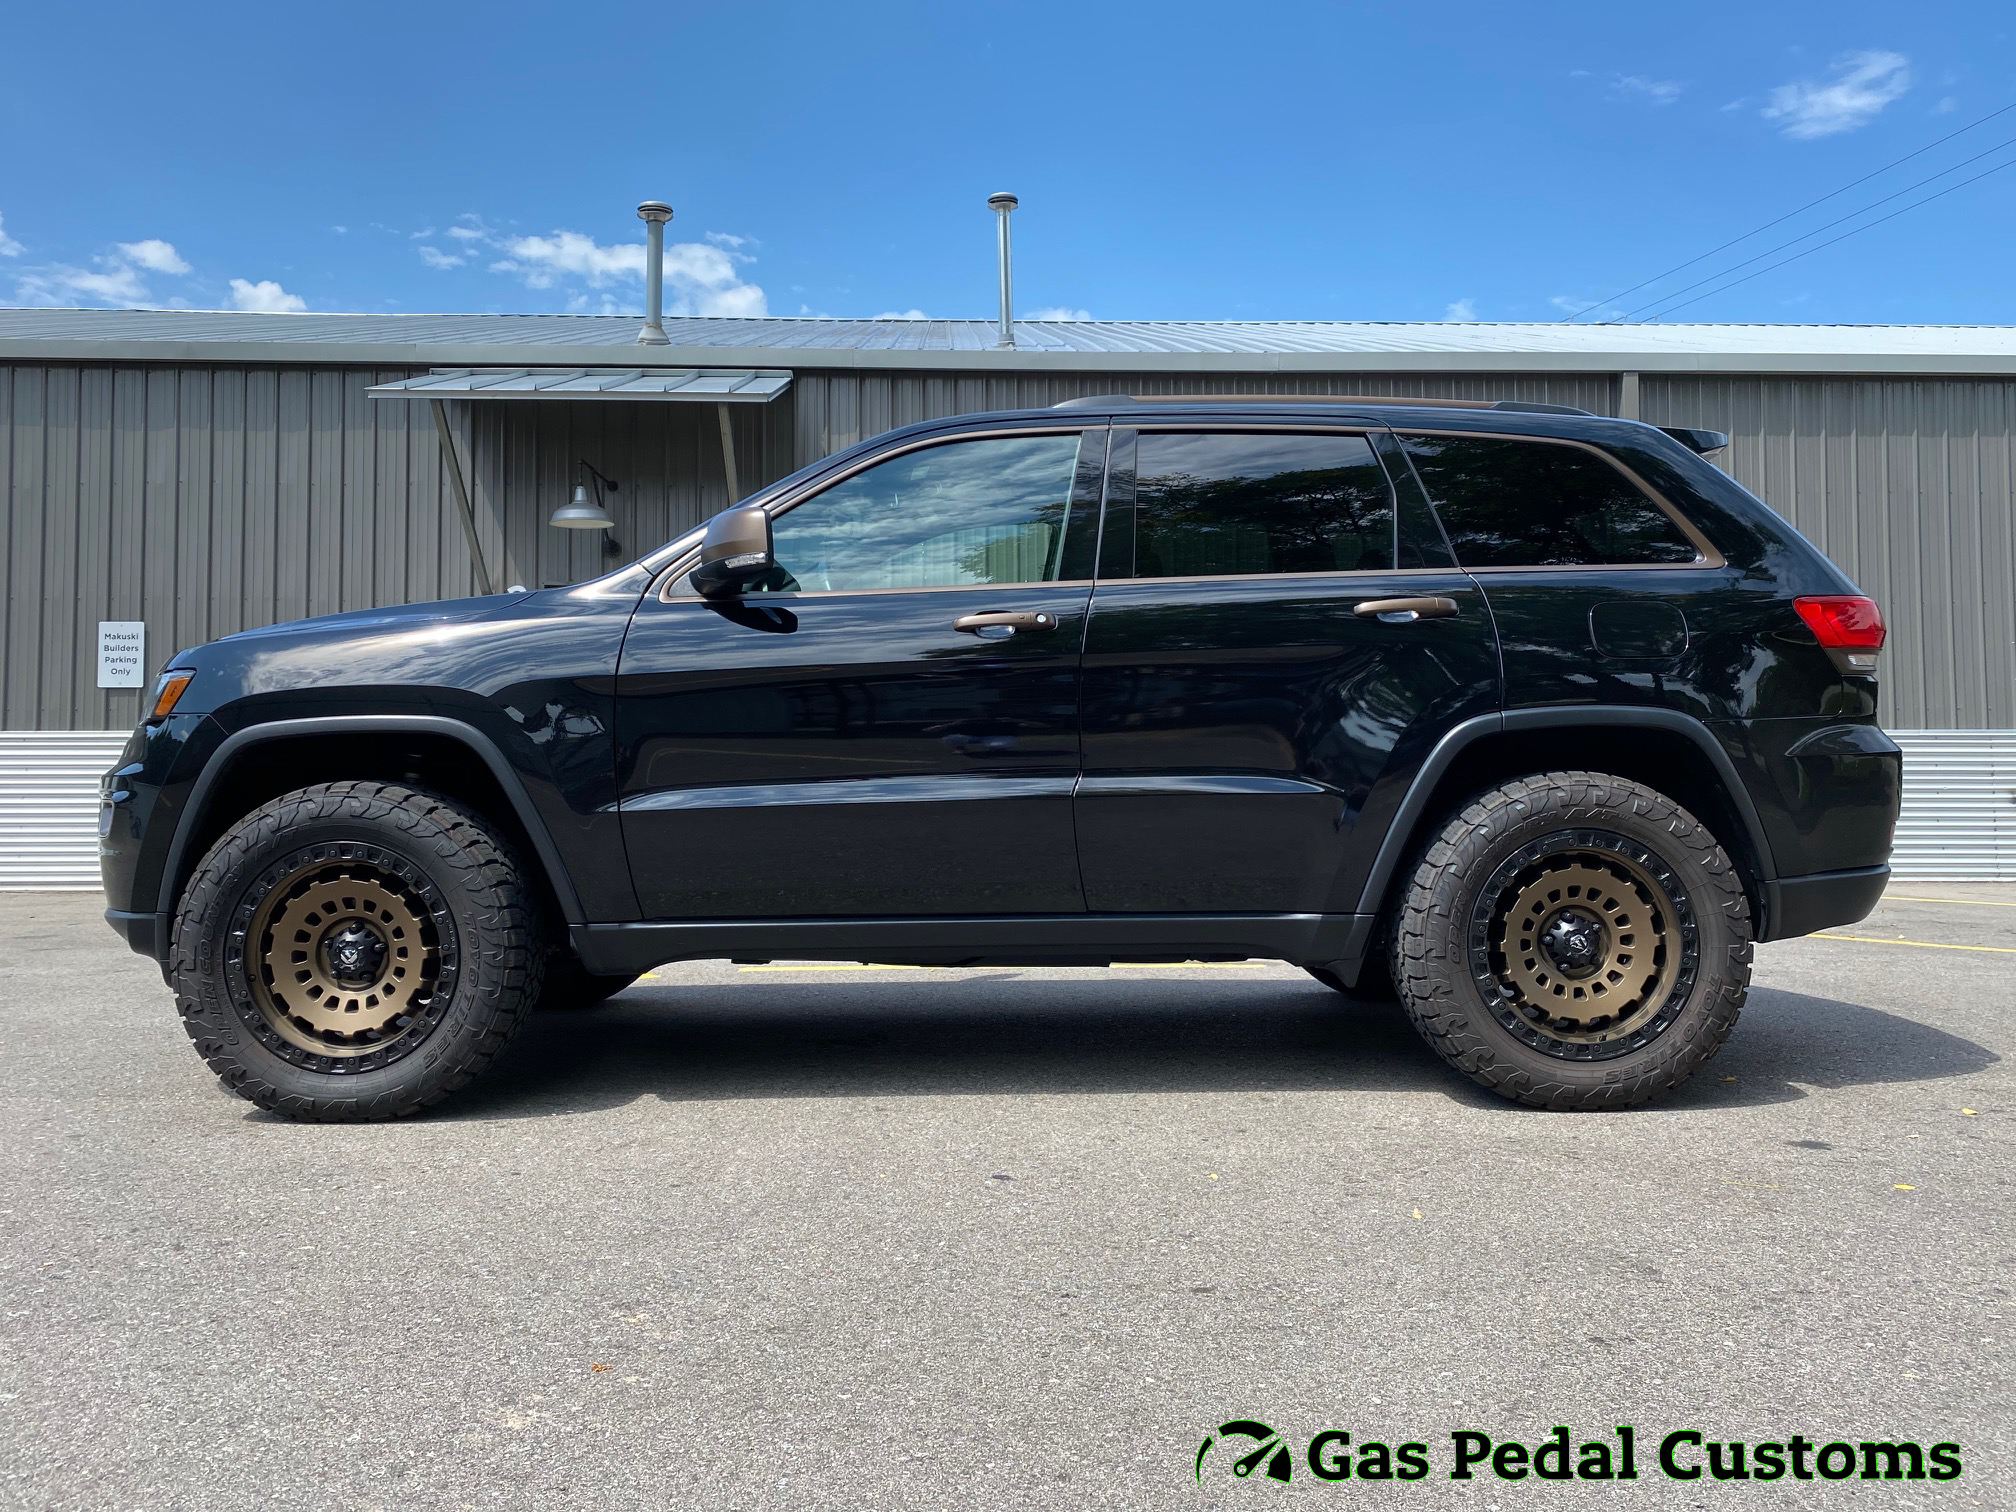 Jeep Grand Cherokee with a lift, Fuel wheels, and Toyo tires